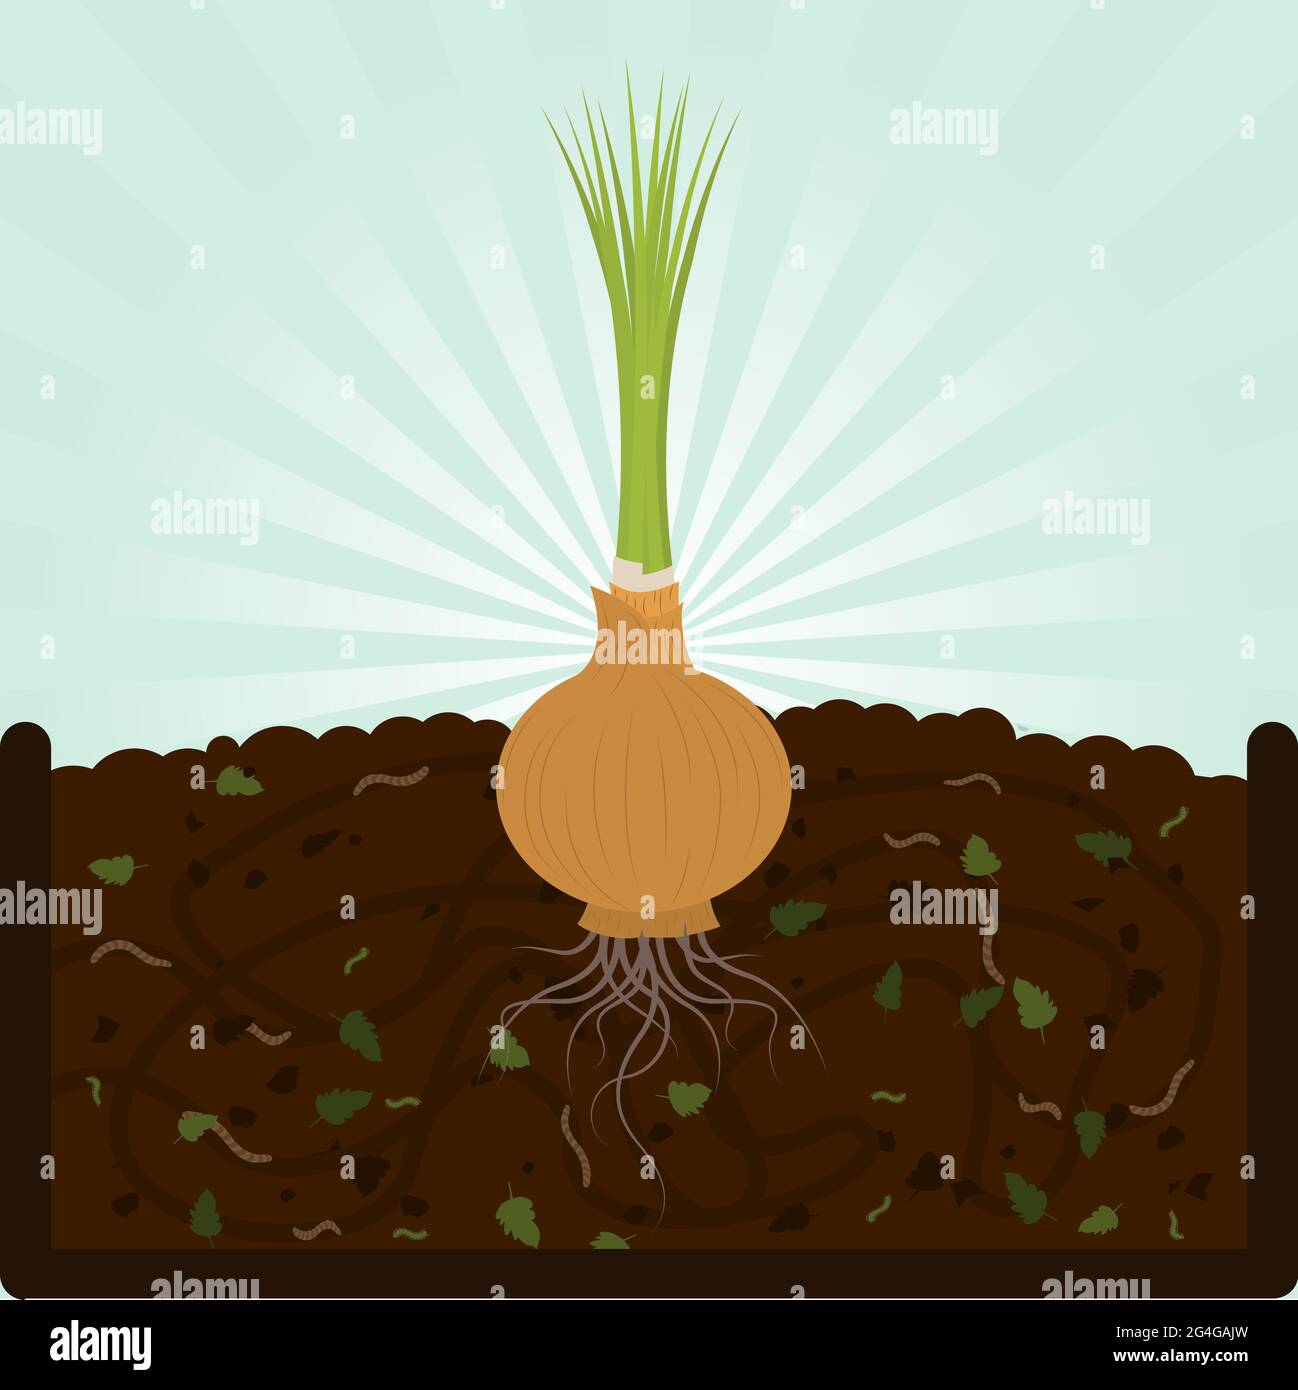 Planting onion. Composting process with organic matter, microorganisms and earthworms. Fallen leaves on the ground. Stock Vector